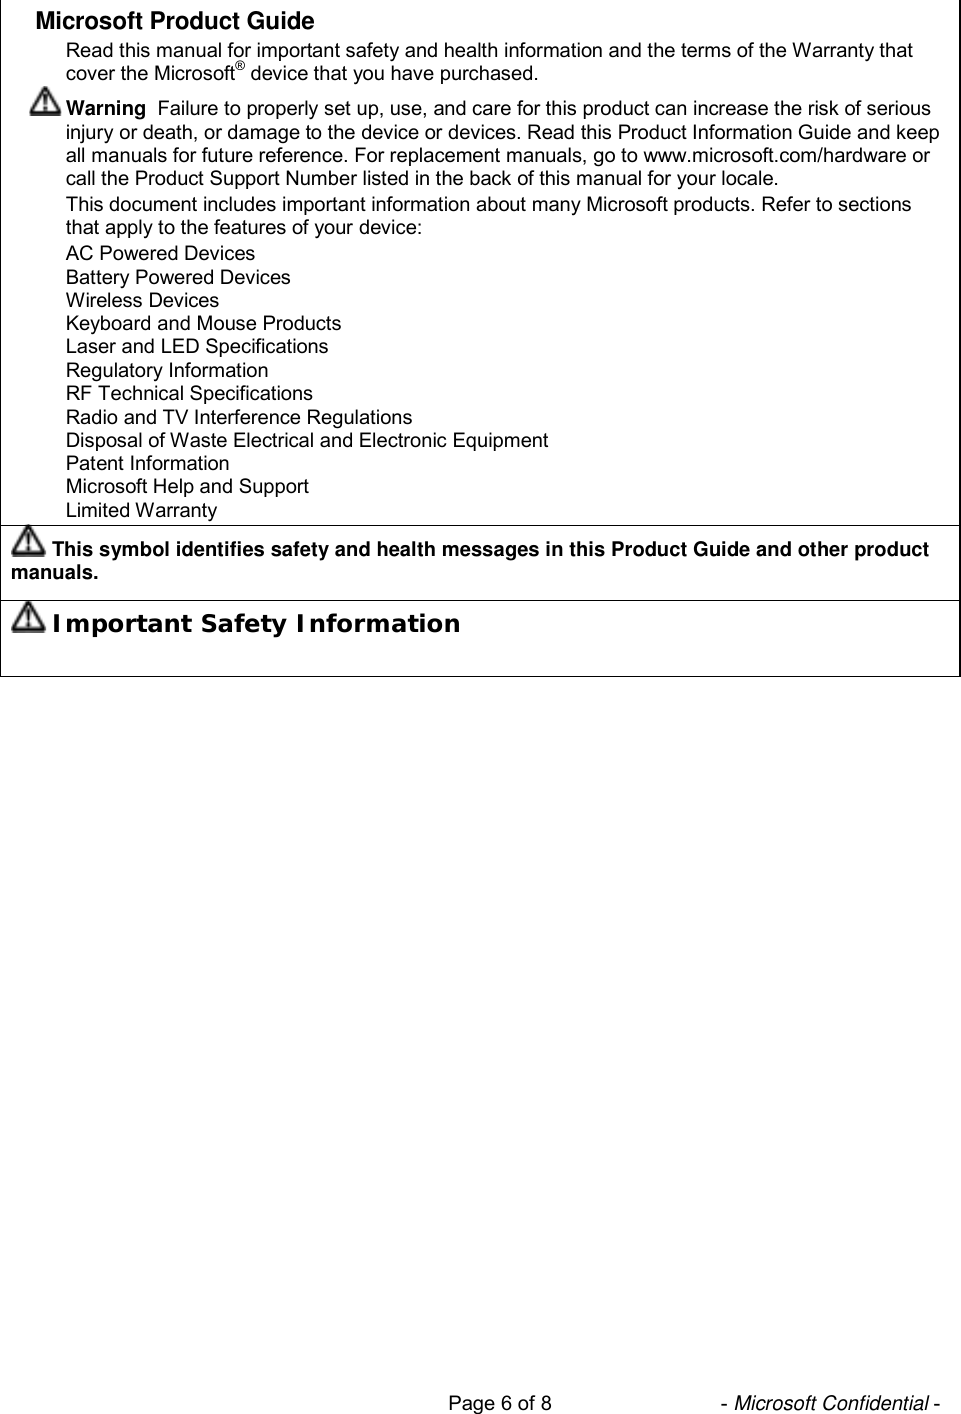                                                                           Page 6 of 8                              - Microsoft Confidential -  Microsoft Product Guide Read this manual for important safety and health information and the terms of the Warranty that cover the Microsoft® device that you have purchased.  Warning  Failure to properly set up, use, and care for this product can increase the risk of serious injury or death, or damage to the device or devices. Read this Product Information Guide and keep all manuals for future reference. For replacement manuals, go to www.microsoft.com/hardware or call the Product Support Number listed in the back of this manual for your locale. This document includes important information about many Microsoft products. Refer to sections that apply to the features of your device: AC Powered Devices Battery Powered Devices Wireless Devices Keyboard and Mouse Products Laser and LED Specifications Regulatory Information RF Technical Specifications Radio and TV Interference Regulations Disposal of Waste Electrical and Electronic Equipment Patent Information Microsoft Help and Support Limited Warranty  This symbol identifies safety and health messages in this Product Guide and other product manuals.  Important Safety Information 